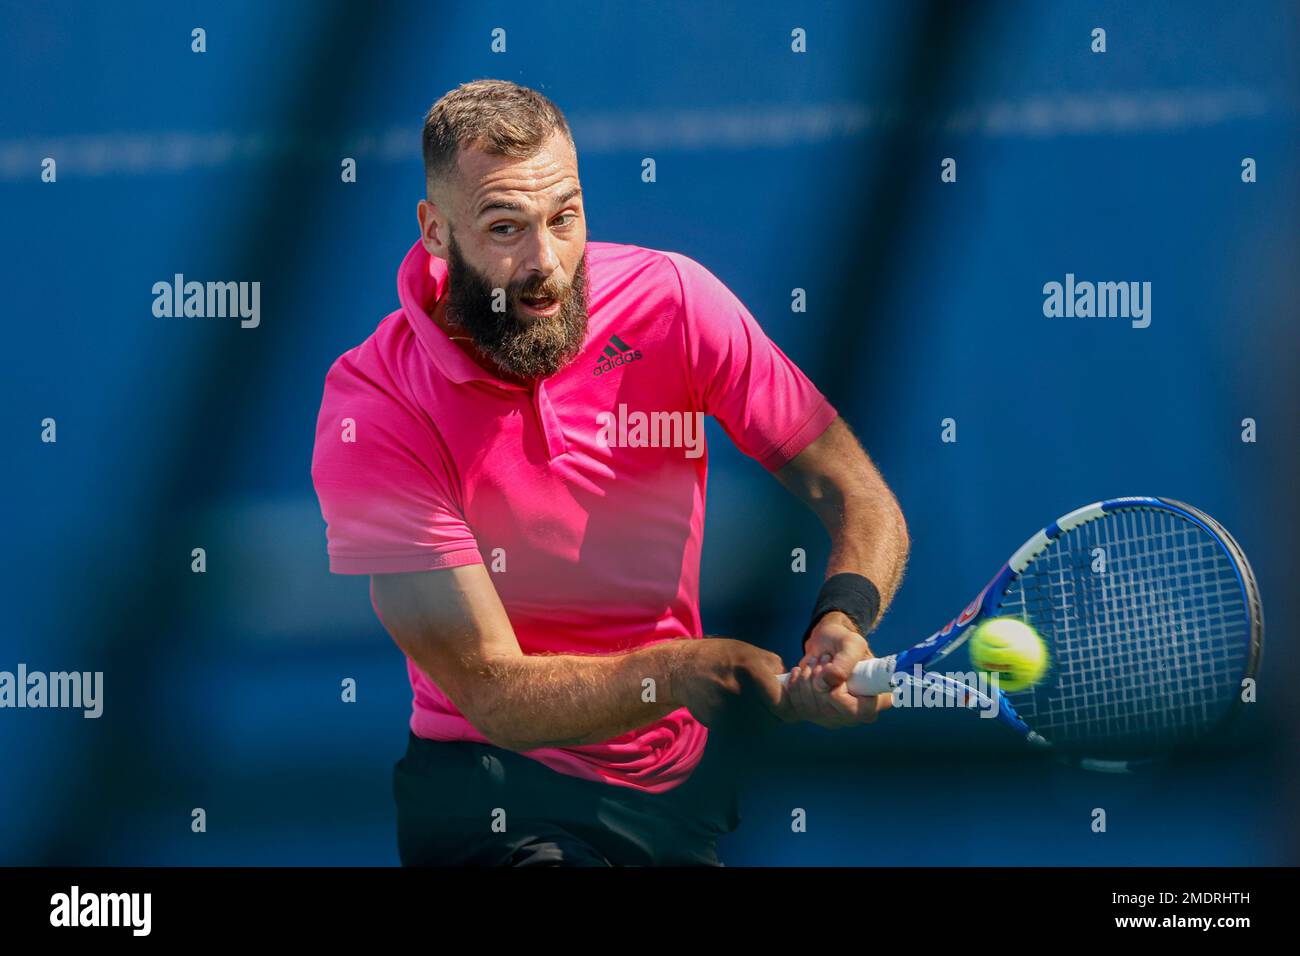 Benoit Paire, of France, hits a return to Emil Ruusuvuori in the Round of 16 at the Winston-Salem Open tennis tournament in Winston-Salem, N.C., Wednesday, Aug